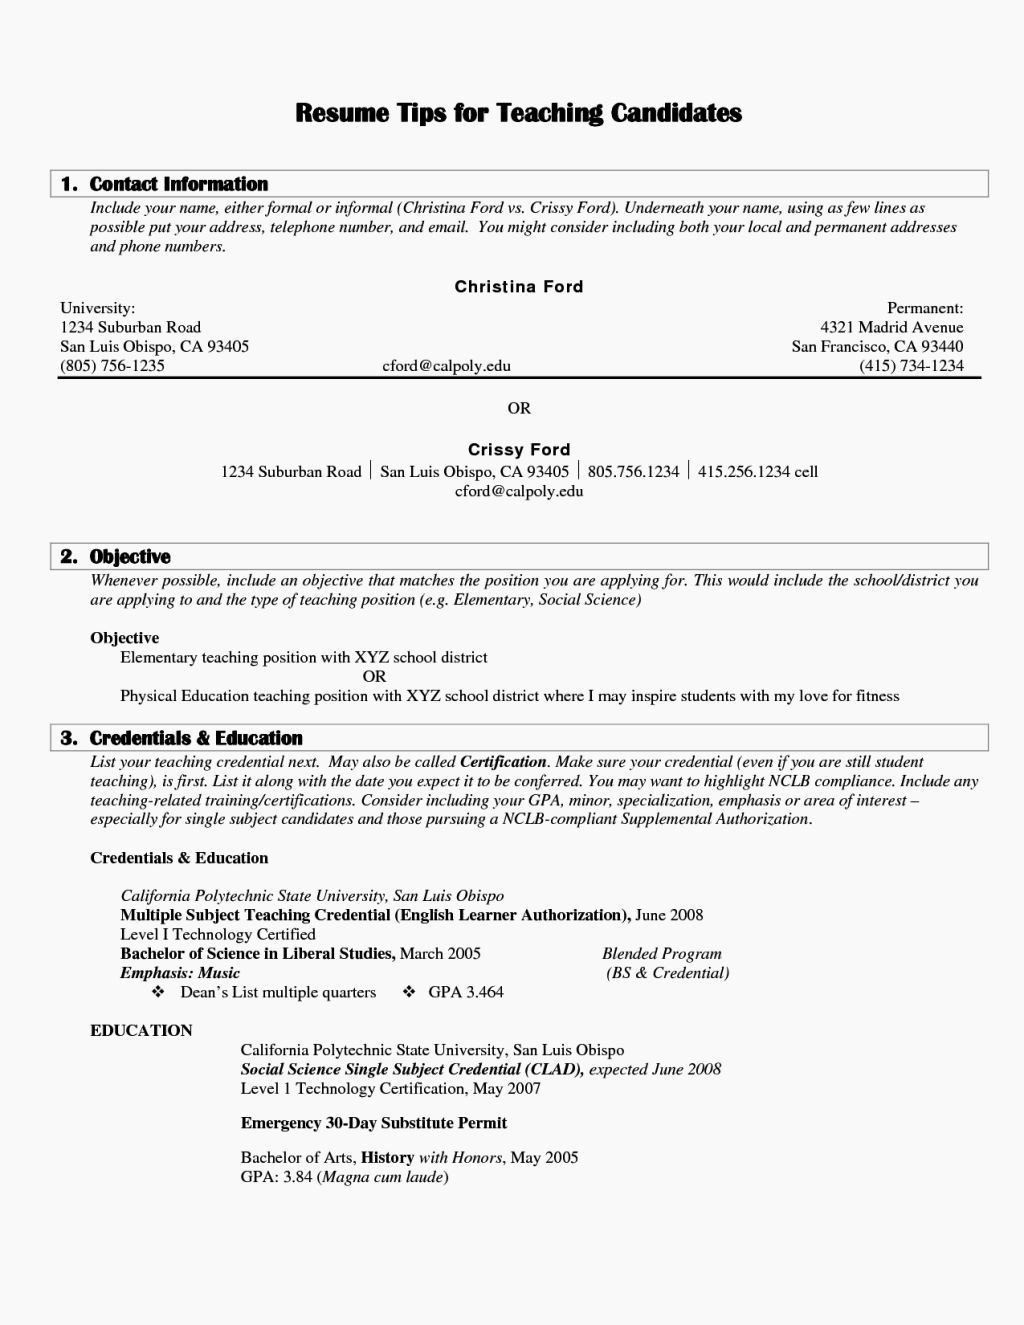 Pin on Resume example and tips